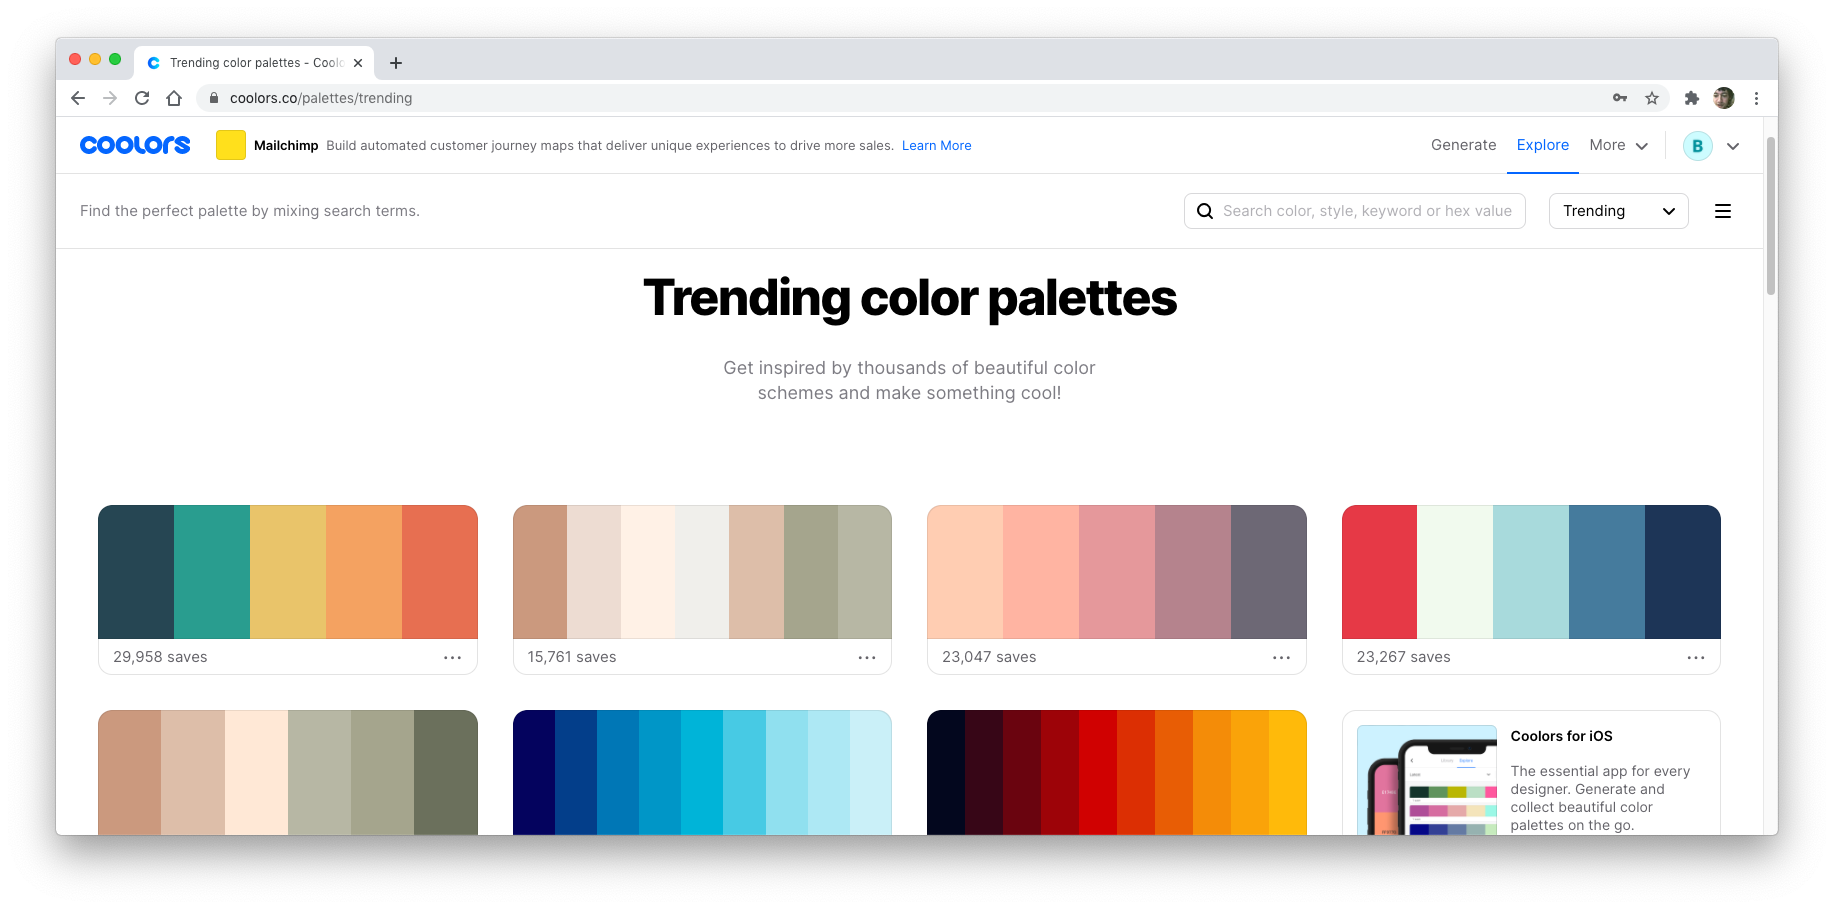 A screenshot showing trending palettes on Coolors.co